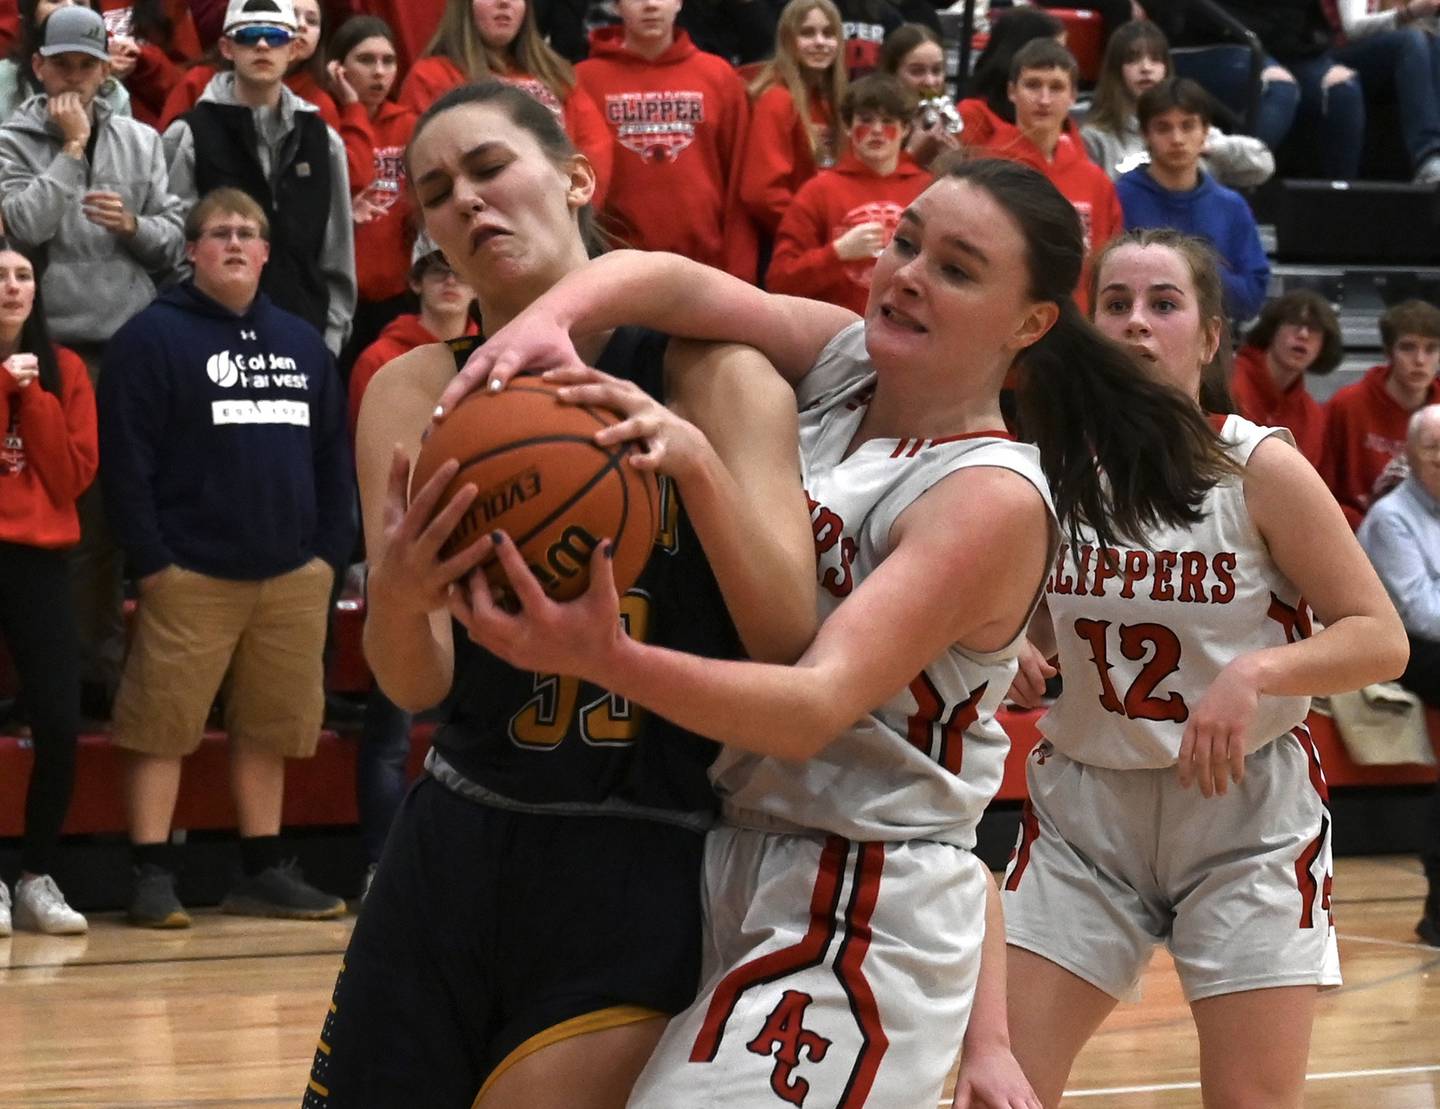 Polo's Lindee Poper (left) and Amboy's Emily Sachs fight for a rebound during Friday night's Class 1A Amboy Regional final.